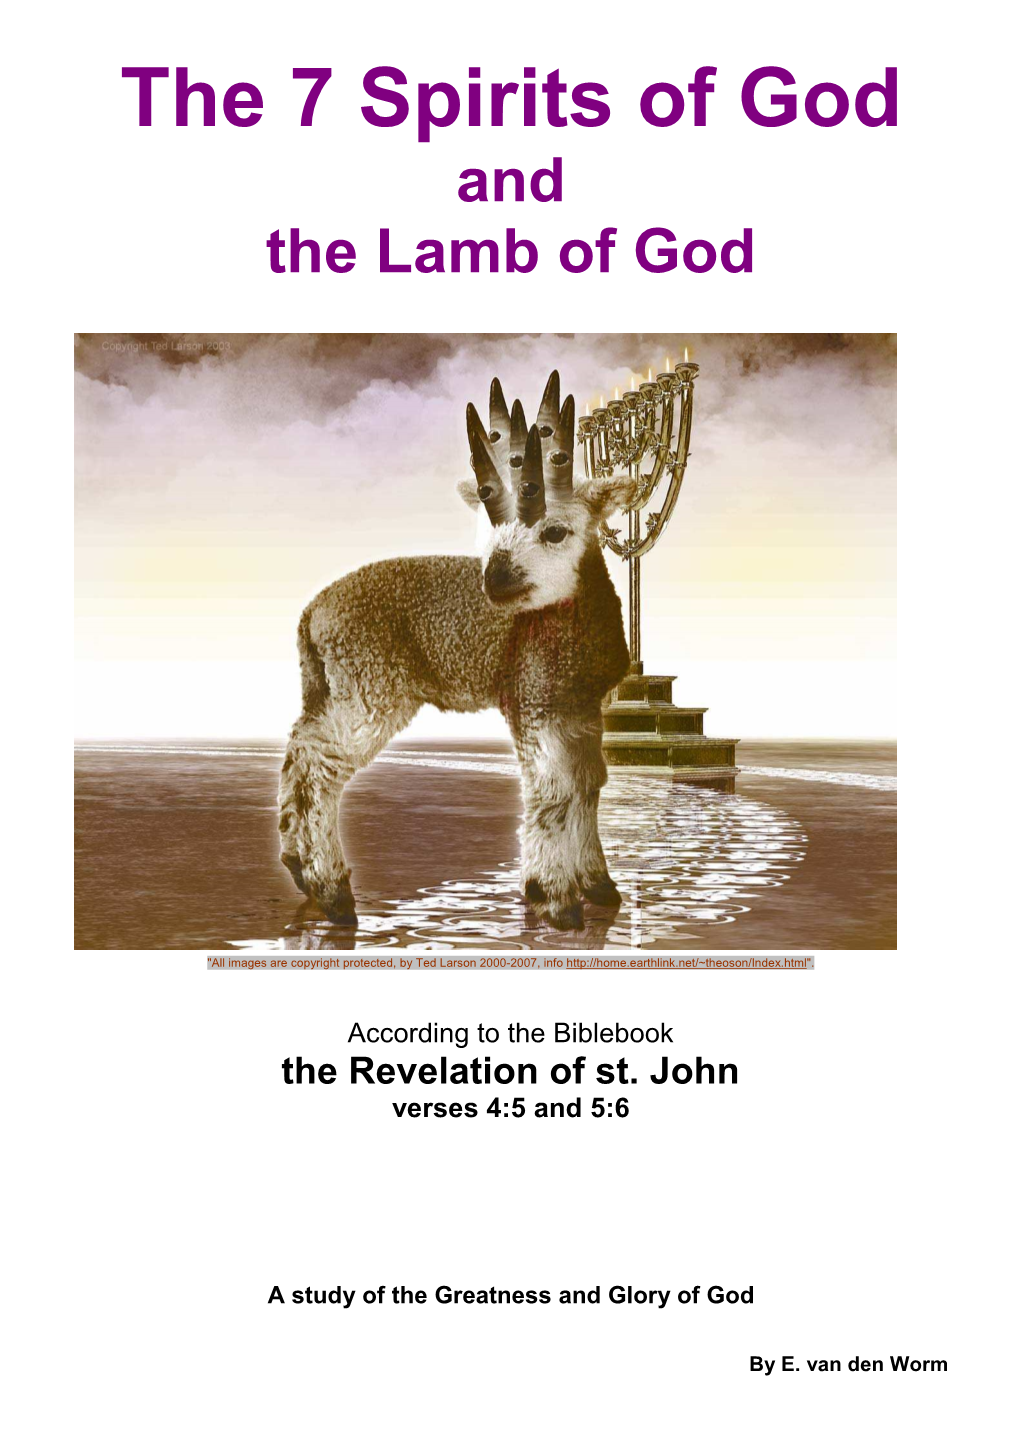 The 7 Spirits of God and the Lamb of God